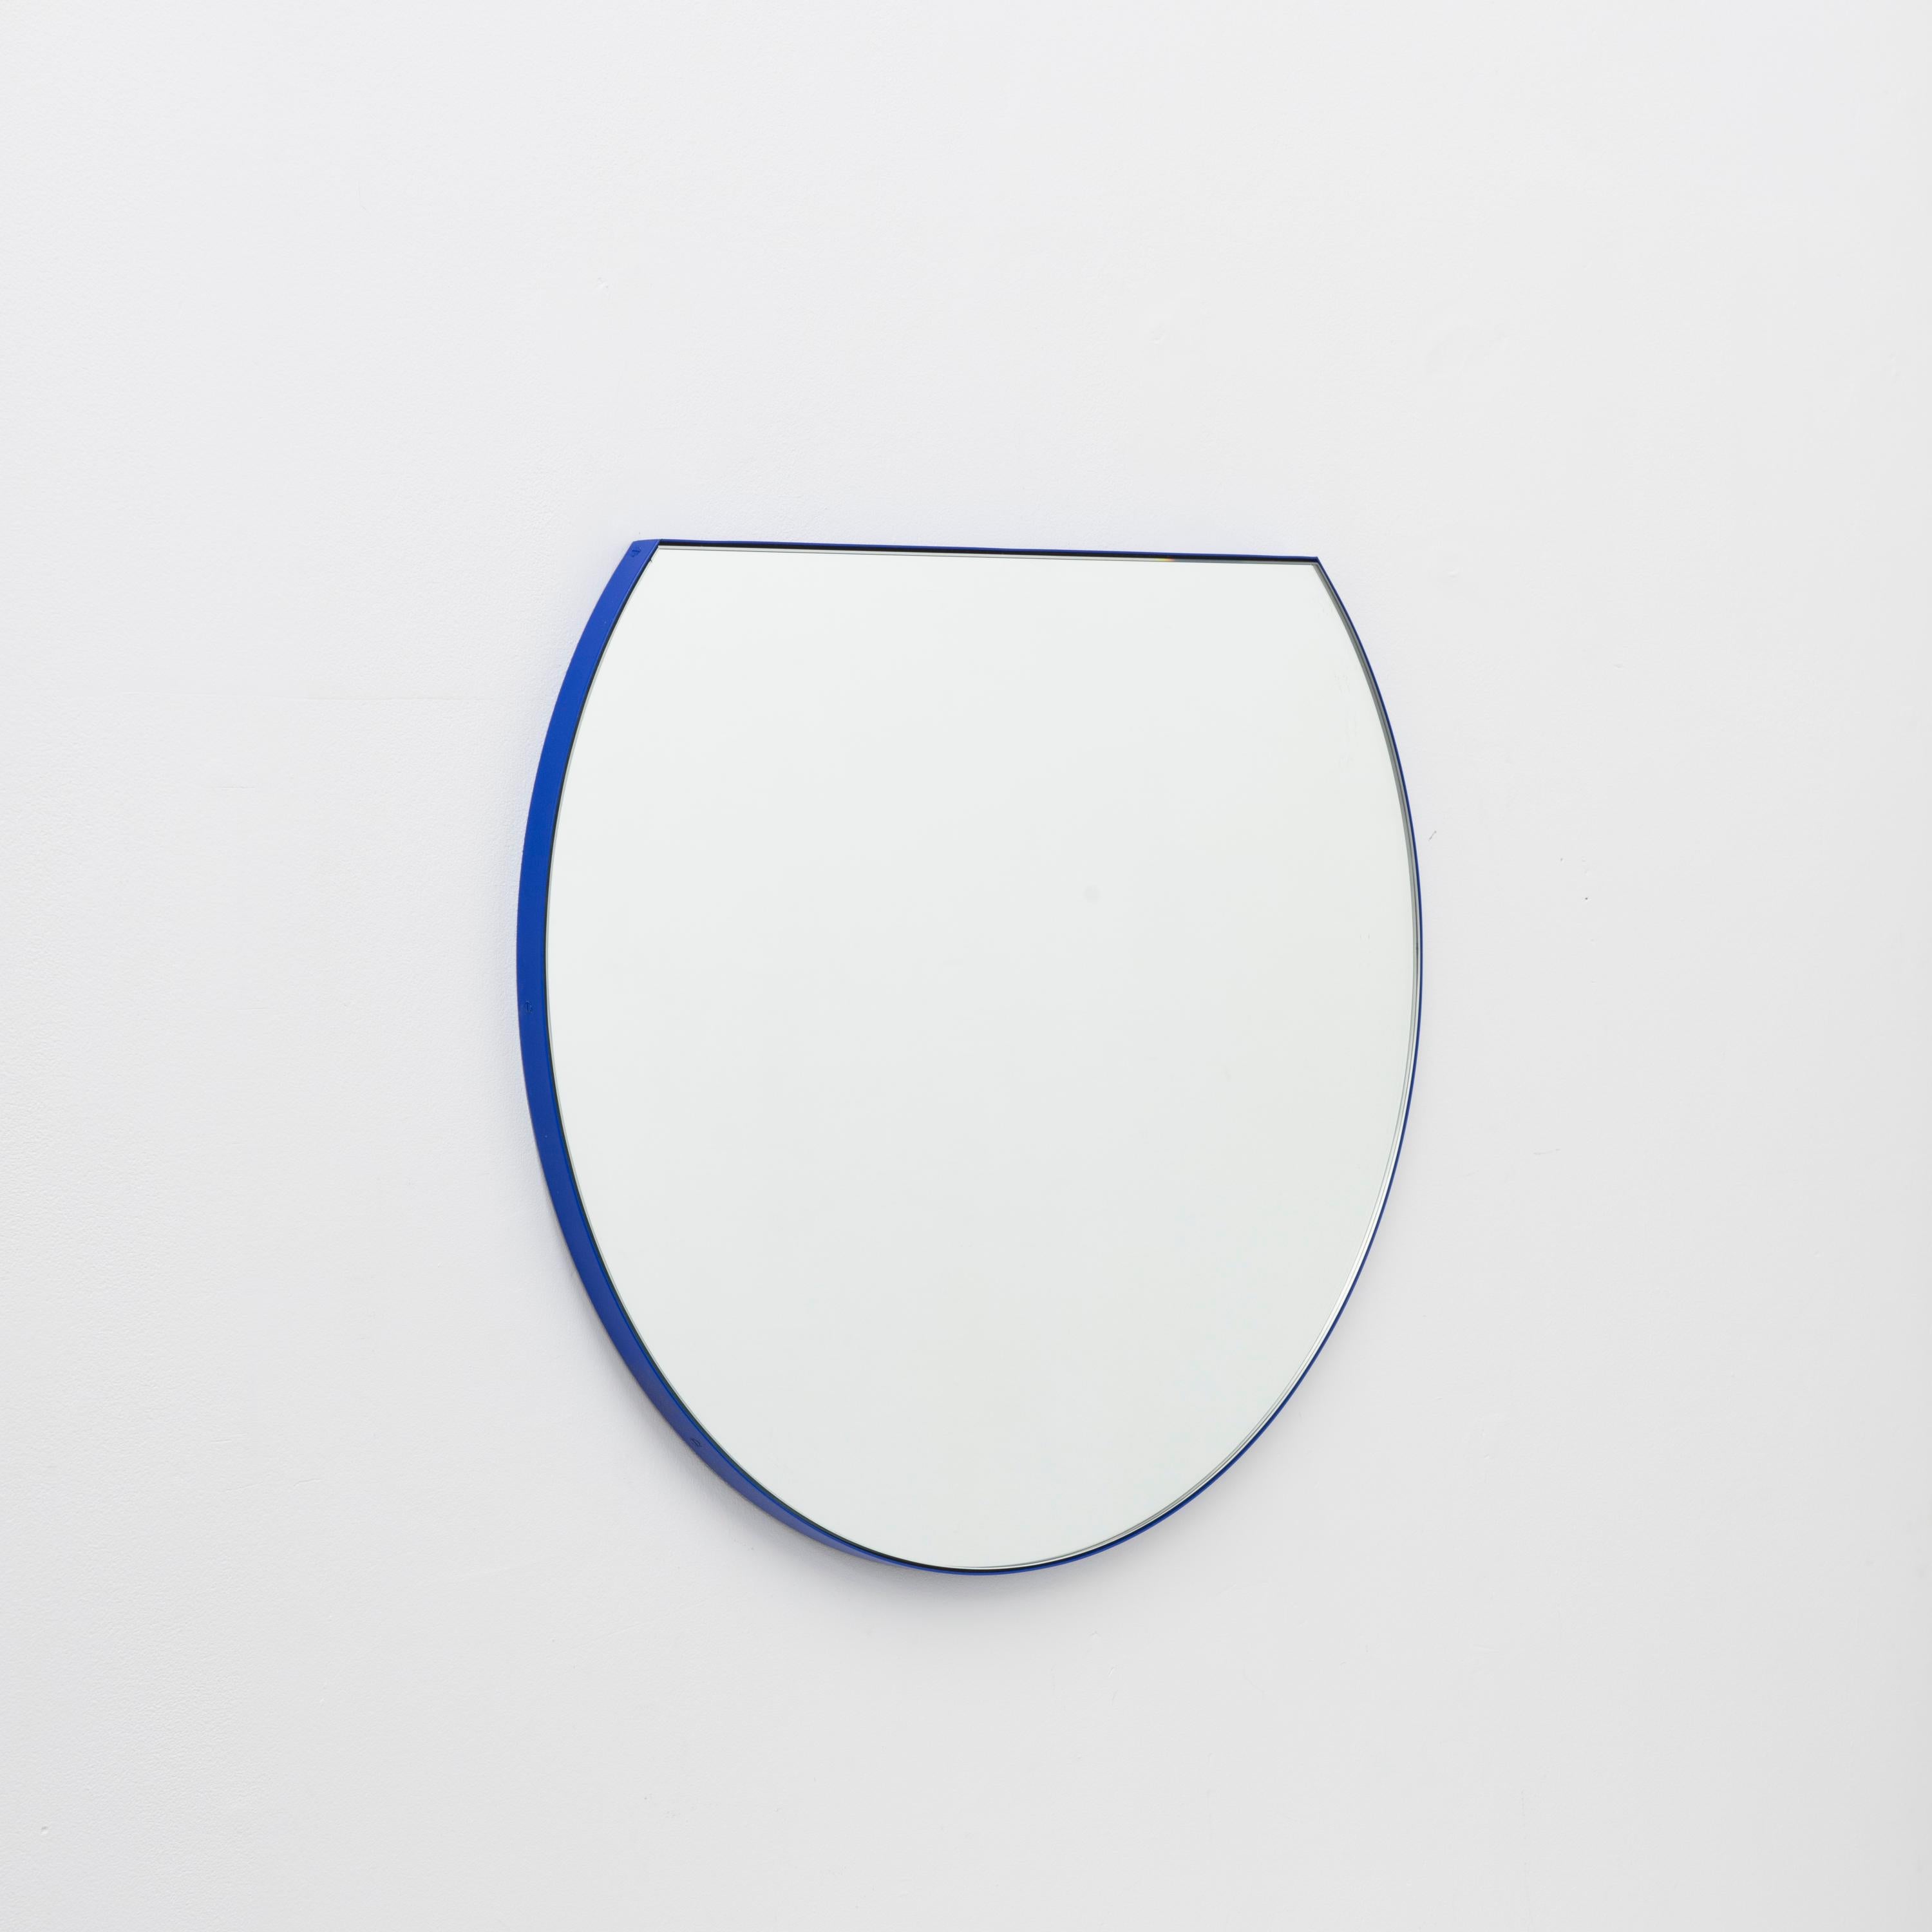 New modern round mirror with a vibrant powder coated aluminium blue frame. Designed and handcrafted in London, UK.

Fitted with a brass hook or an aluminium z-bar (depending on the size of the mirror) that allows for the mirror to be hanged in 4